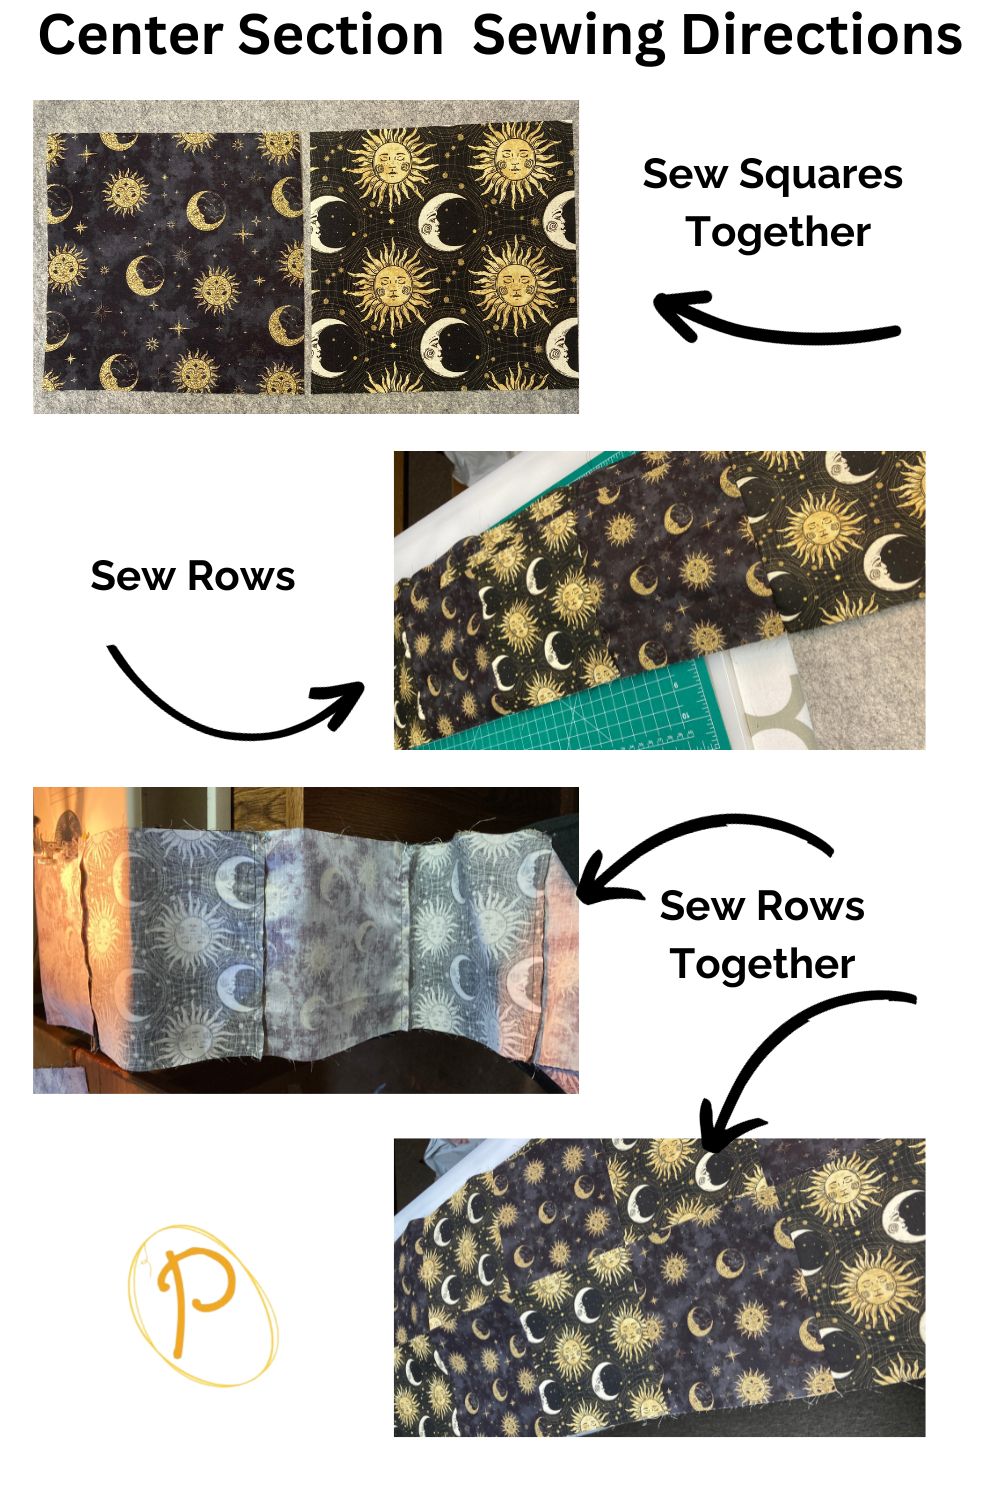 Center Section Sewing Directions